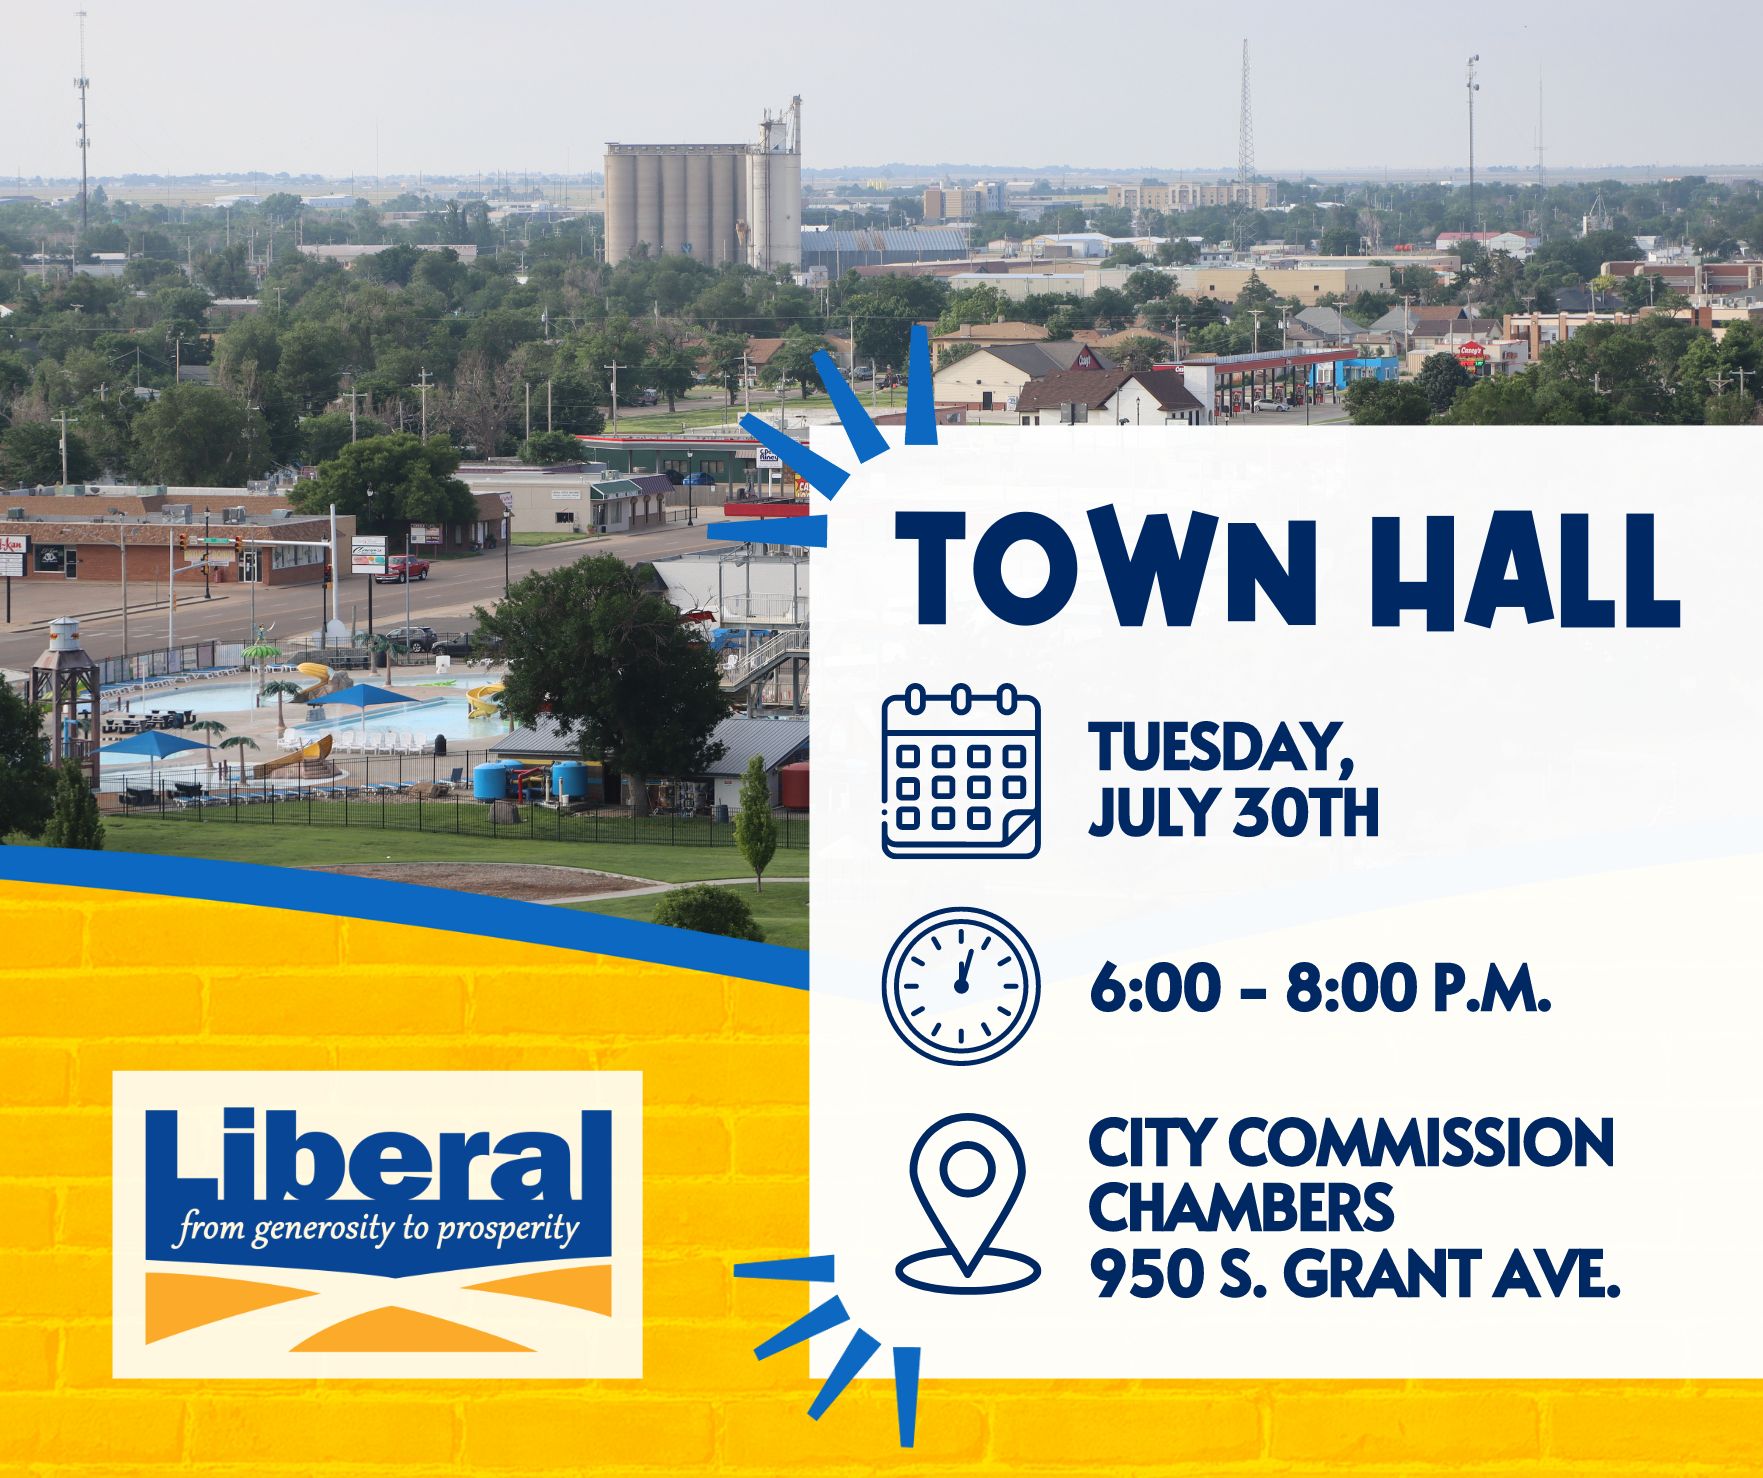 City of Liberal to Host Town Hall